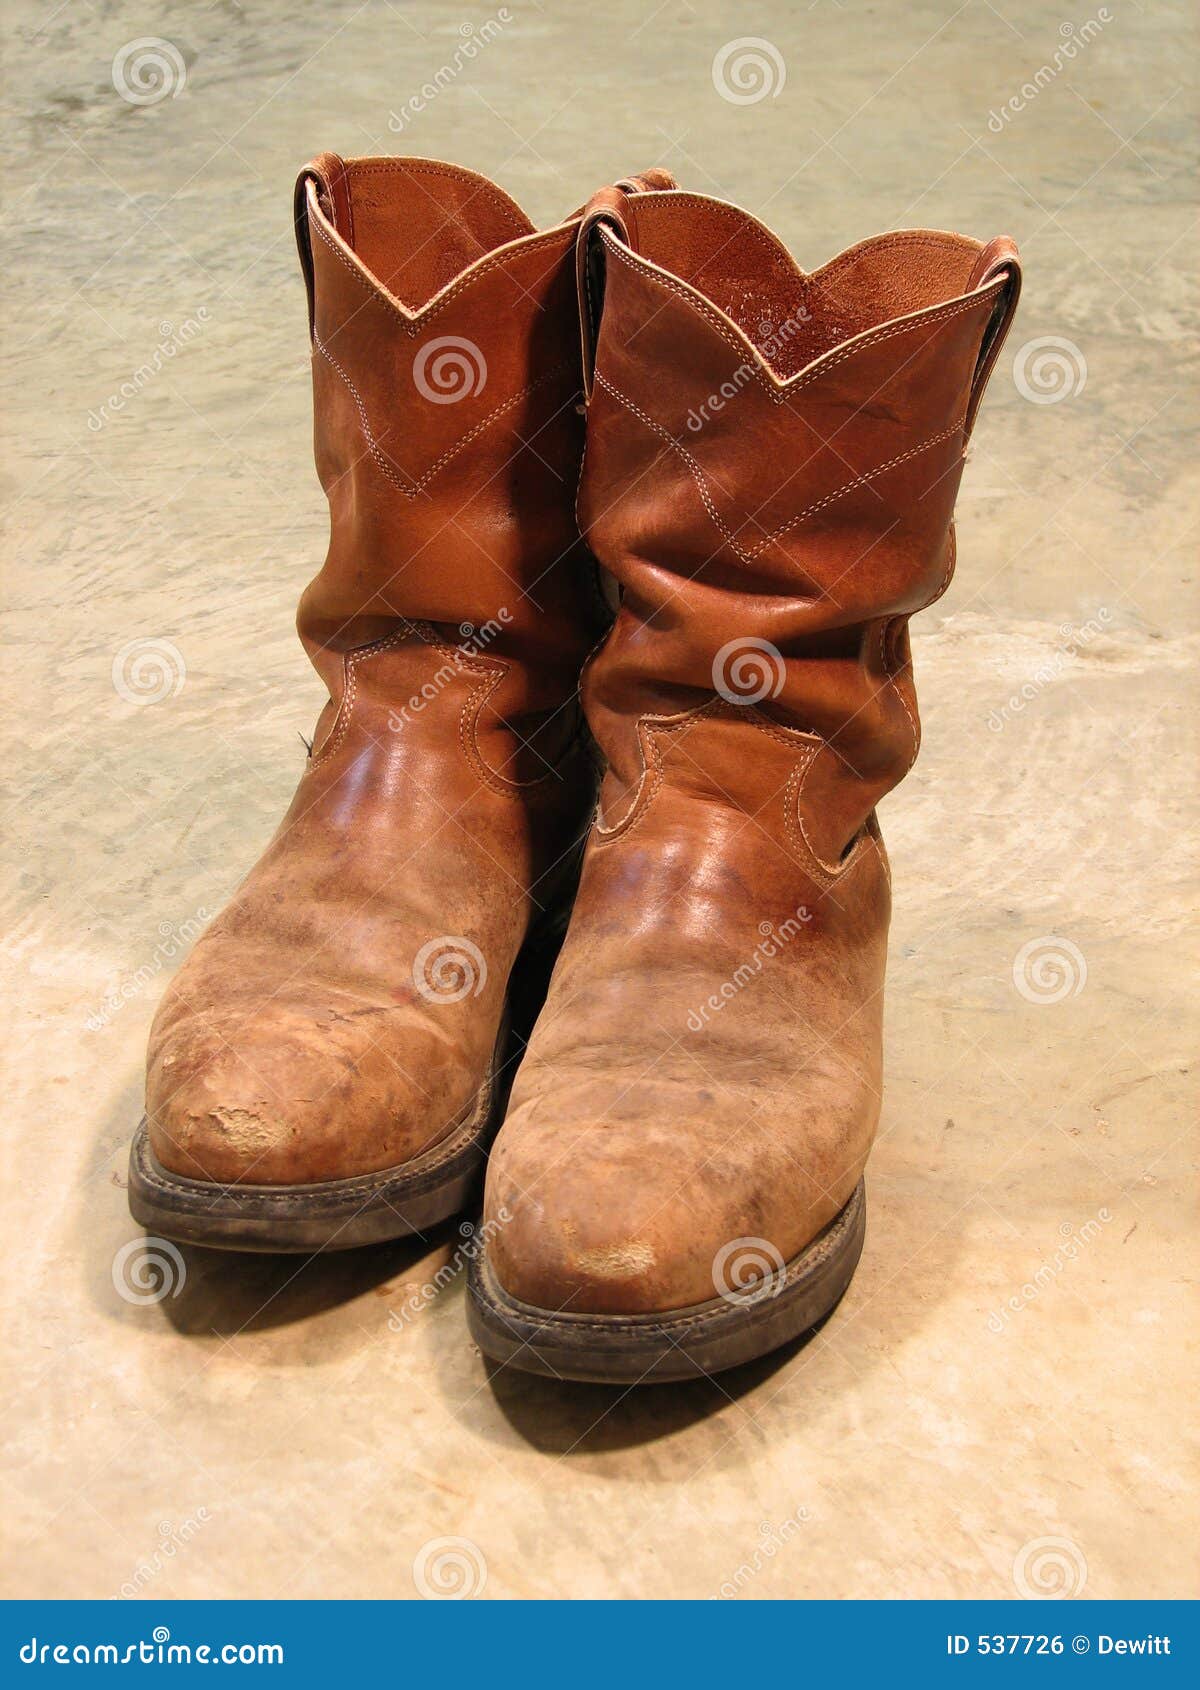 Pair Of Old Boots Royalty Free Stock Image - Image: 537726